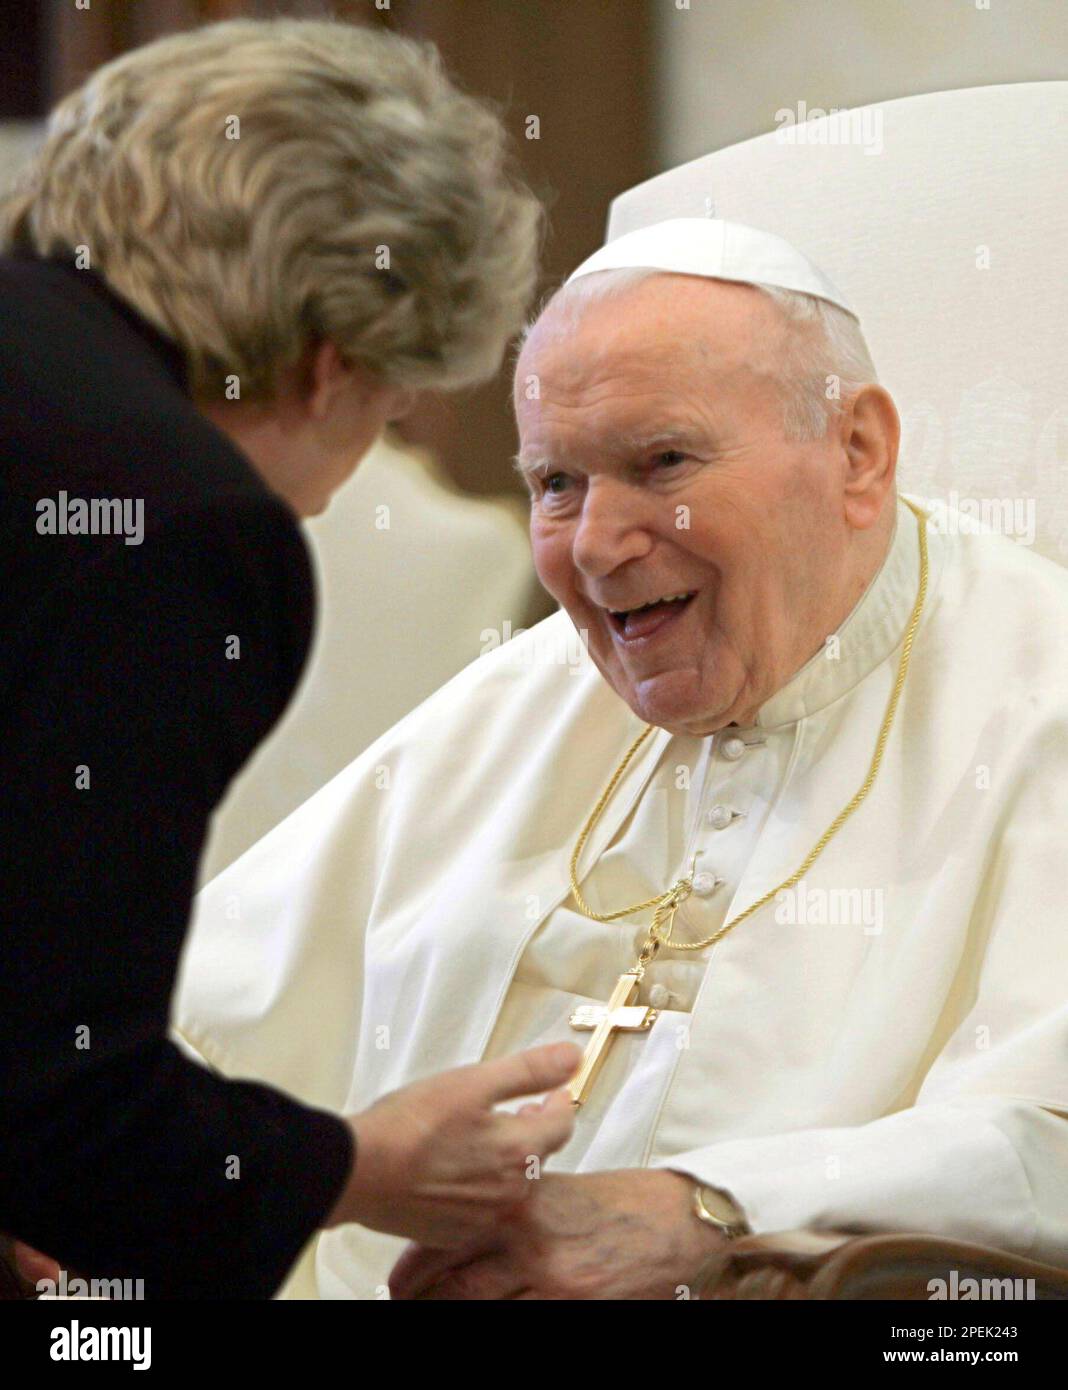 Pope John Paul II smiles as he jokes with the pilgrims as he adresses the  crowd in front of the basilica in Wadowice June 16. The 79-year-old Pontiff  continues his 13-days visit